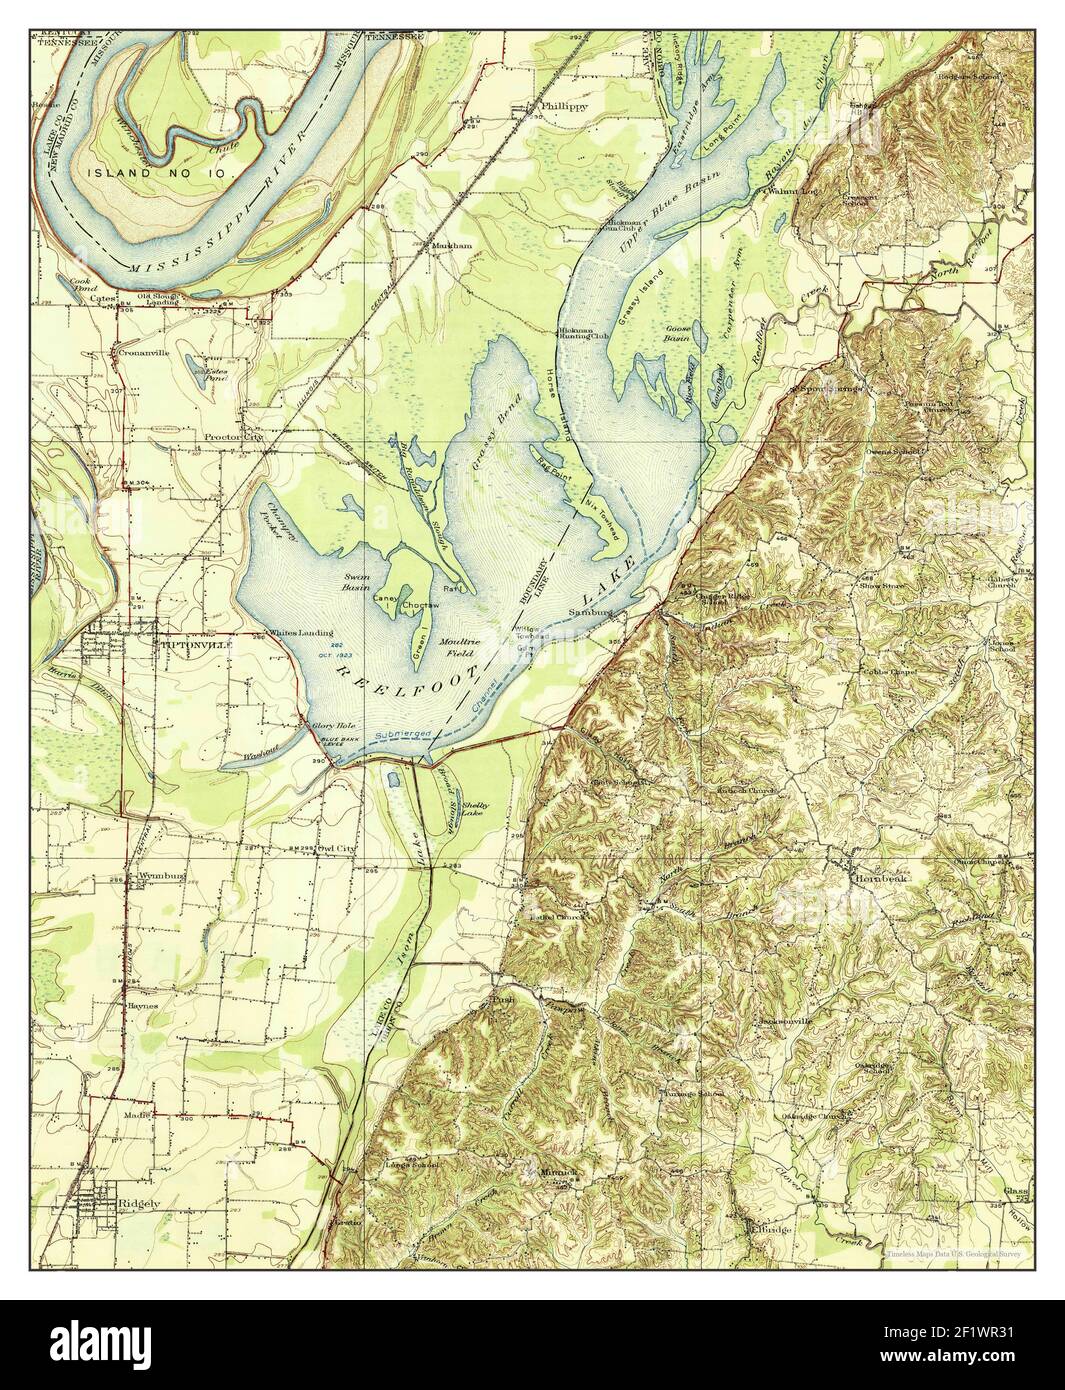 https://c8.alamy.com/comp/2F1WR31/reelfoot-lake-tennessee-map-1925-162500-united-states-of-america-by-timeless-maps-data-us-geological-survey-2F1WR31.jpg